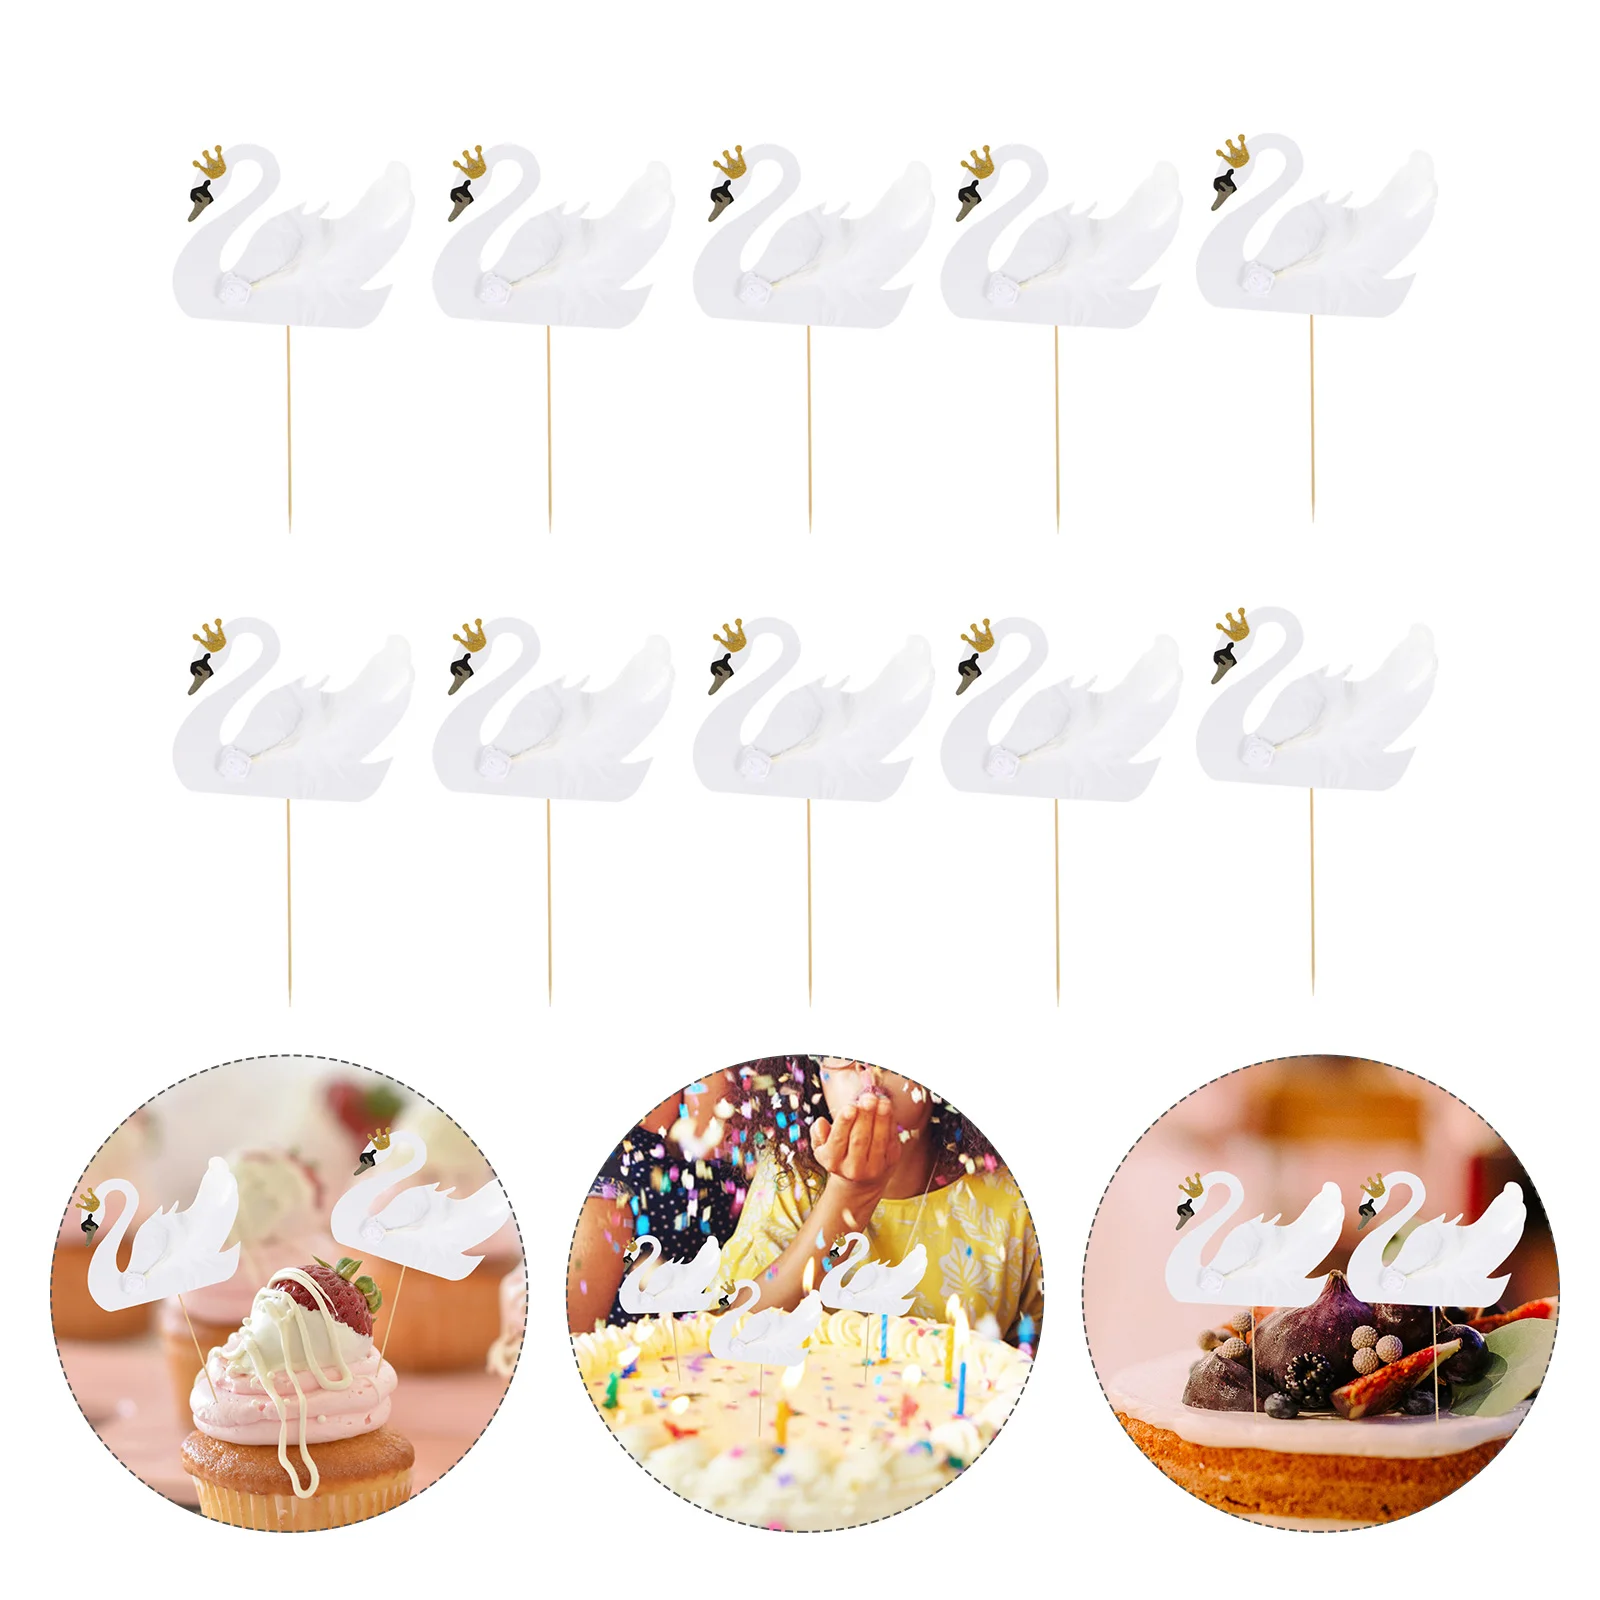 

Topper Swan Cake Picks Birthday Cupcake Dessert Toothpicks Party Fruits Appetizers Toppers Wedding Animal Figurine Decoration